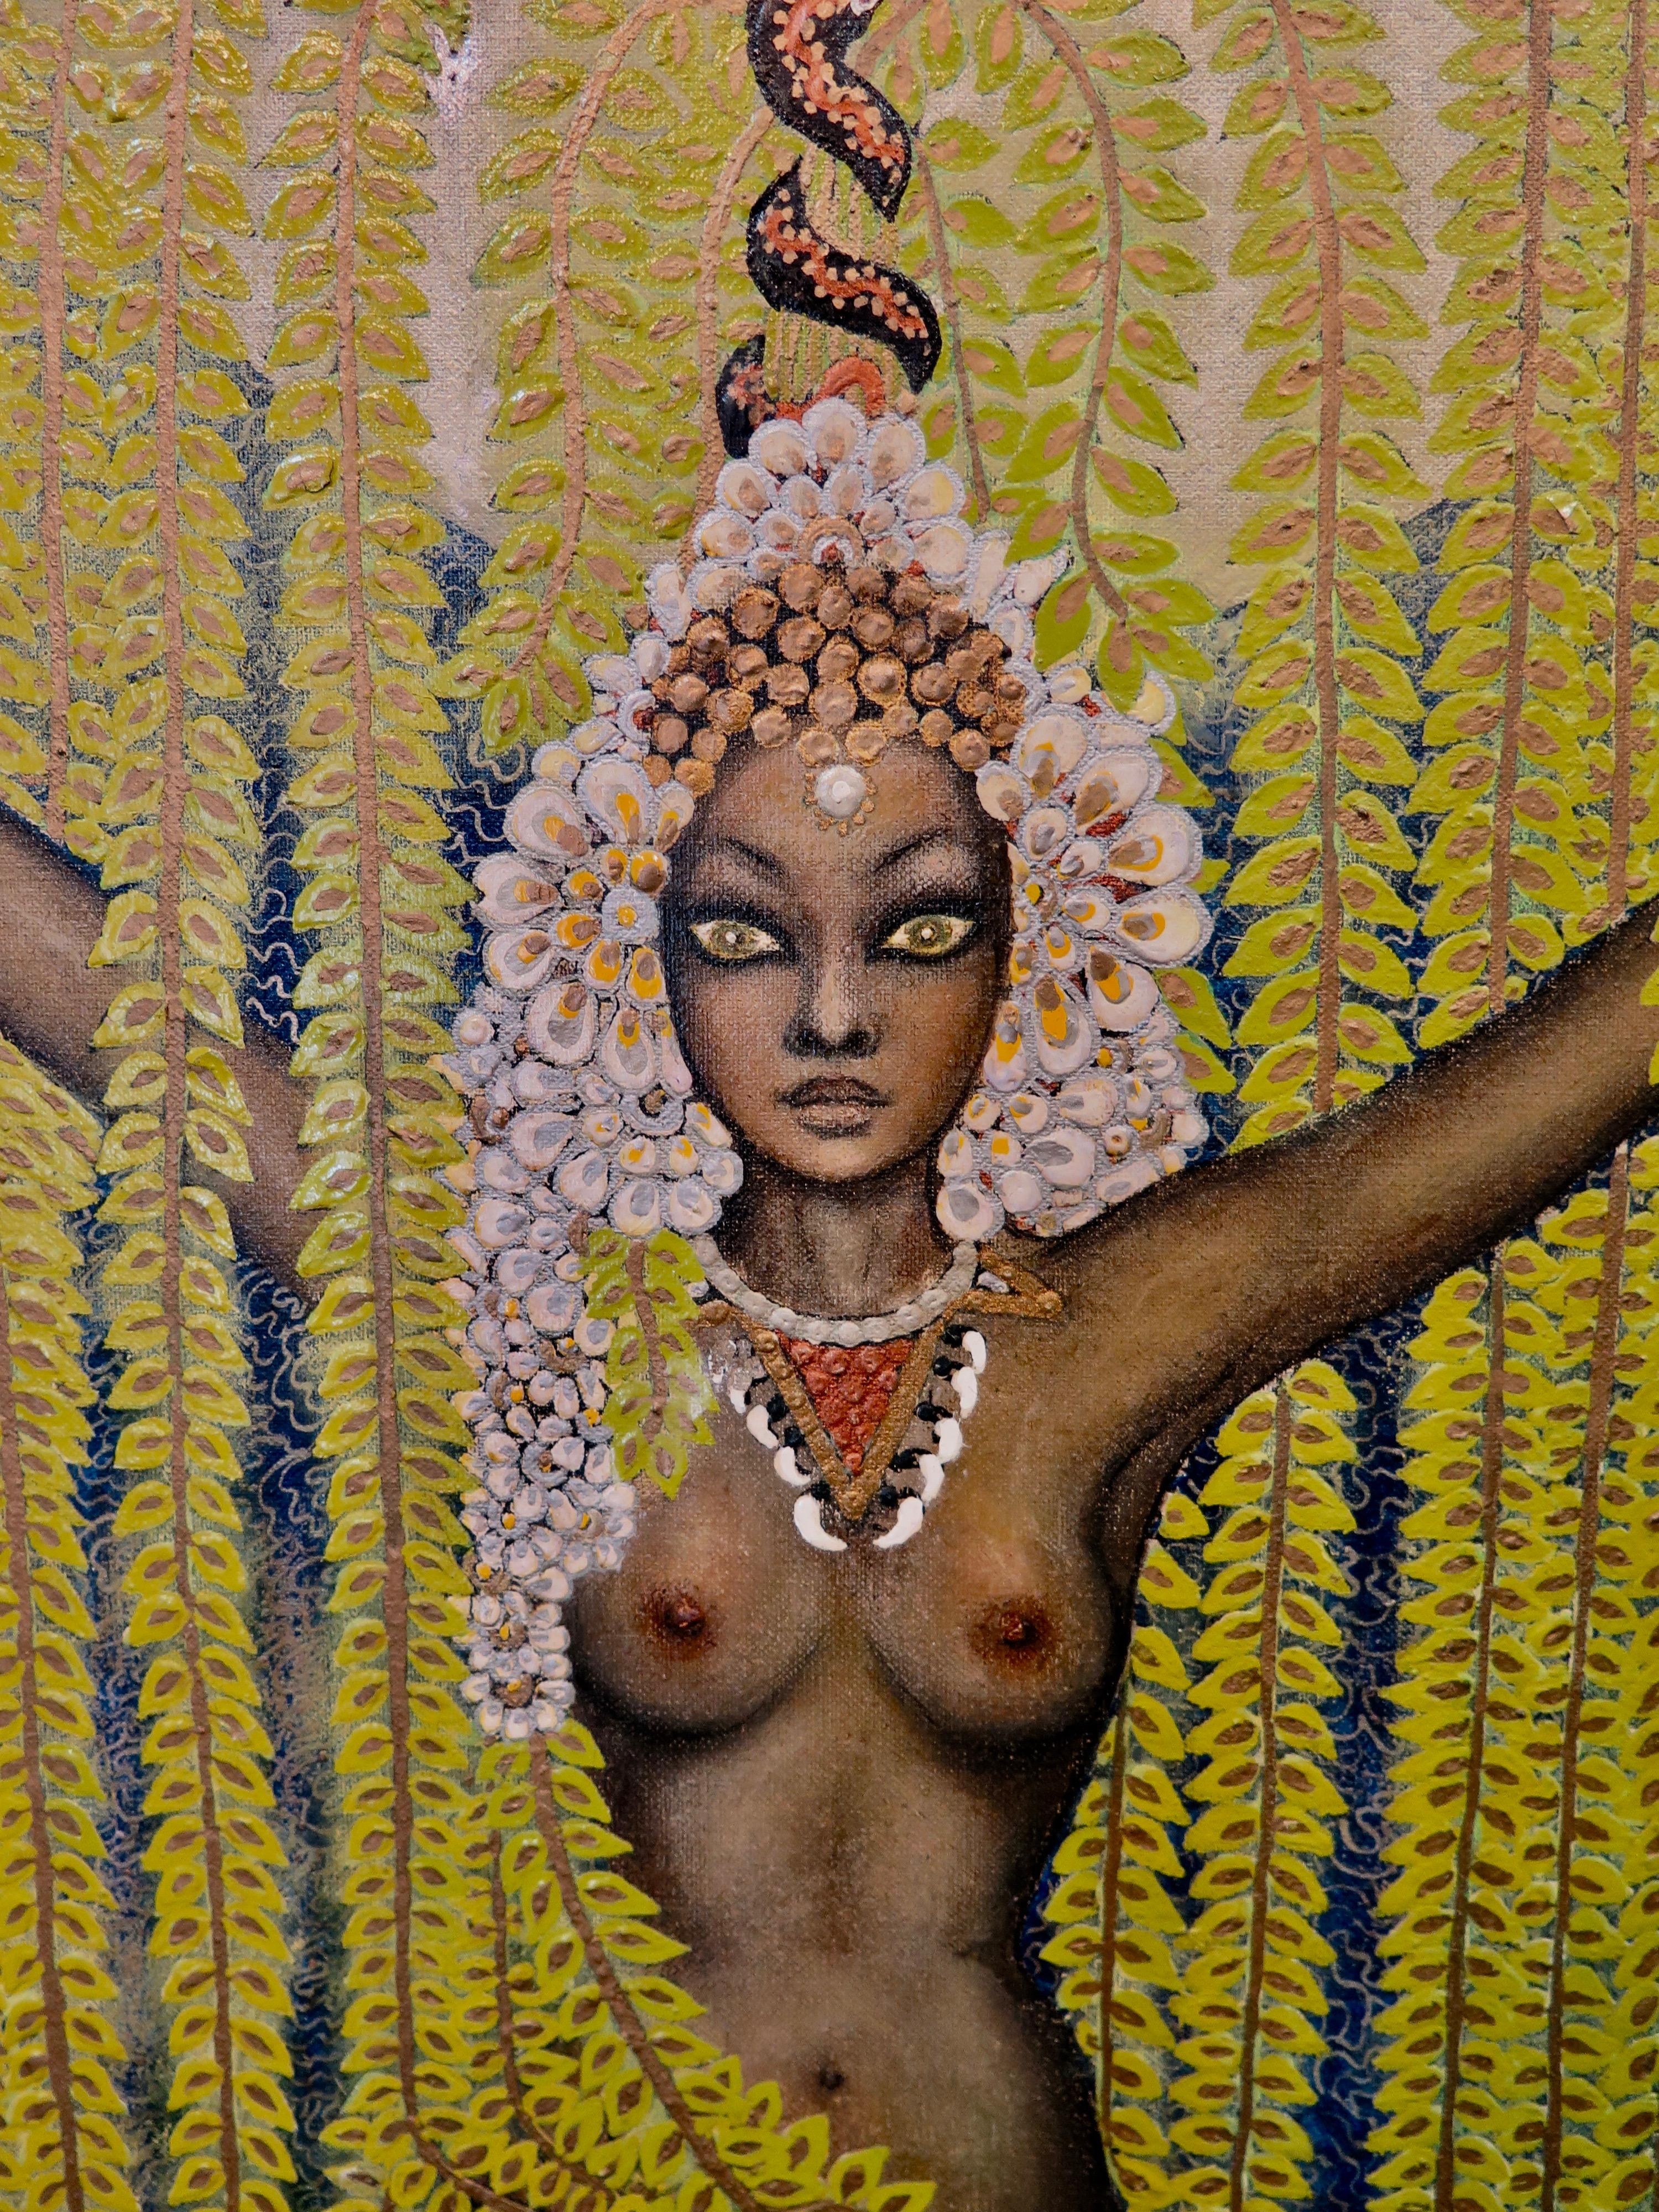 The artist, Mokomo, demonstrates a unique style. The painting is an interesting depiction of a princess in an exotic fertility ritual. This sensual nude island goddess, holding two bizarre ceremonial wands, is posed bare chested, wearing a headdress